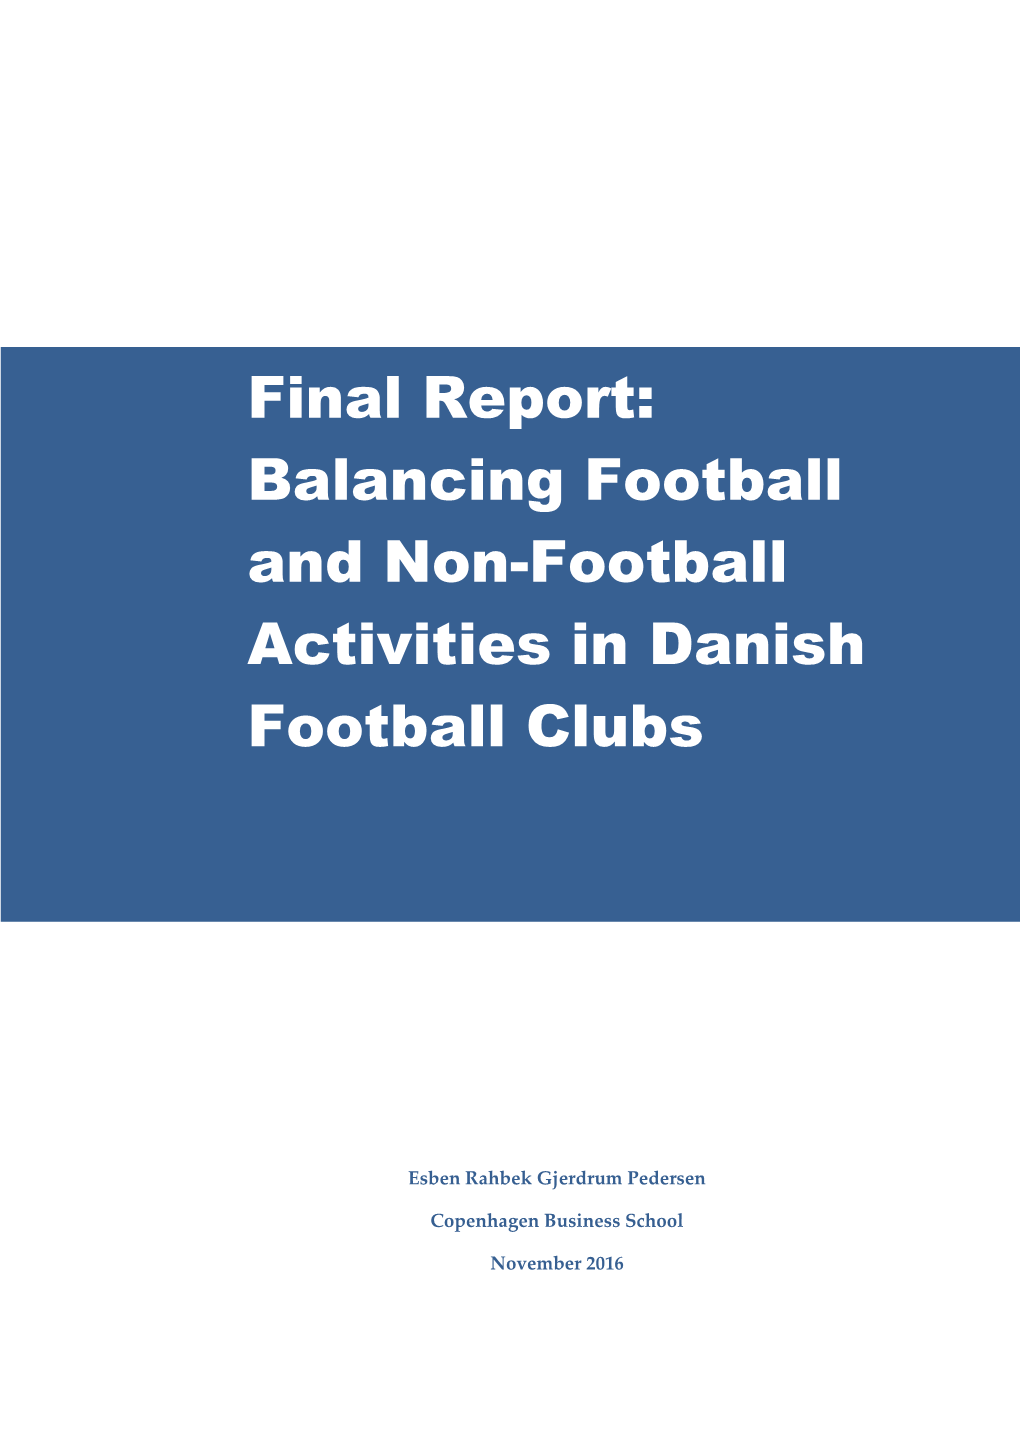 Final Report: Balancing Football and Non-Football Activities in Danish Football Clubs